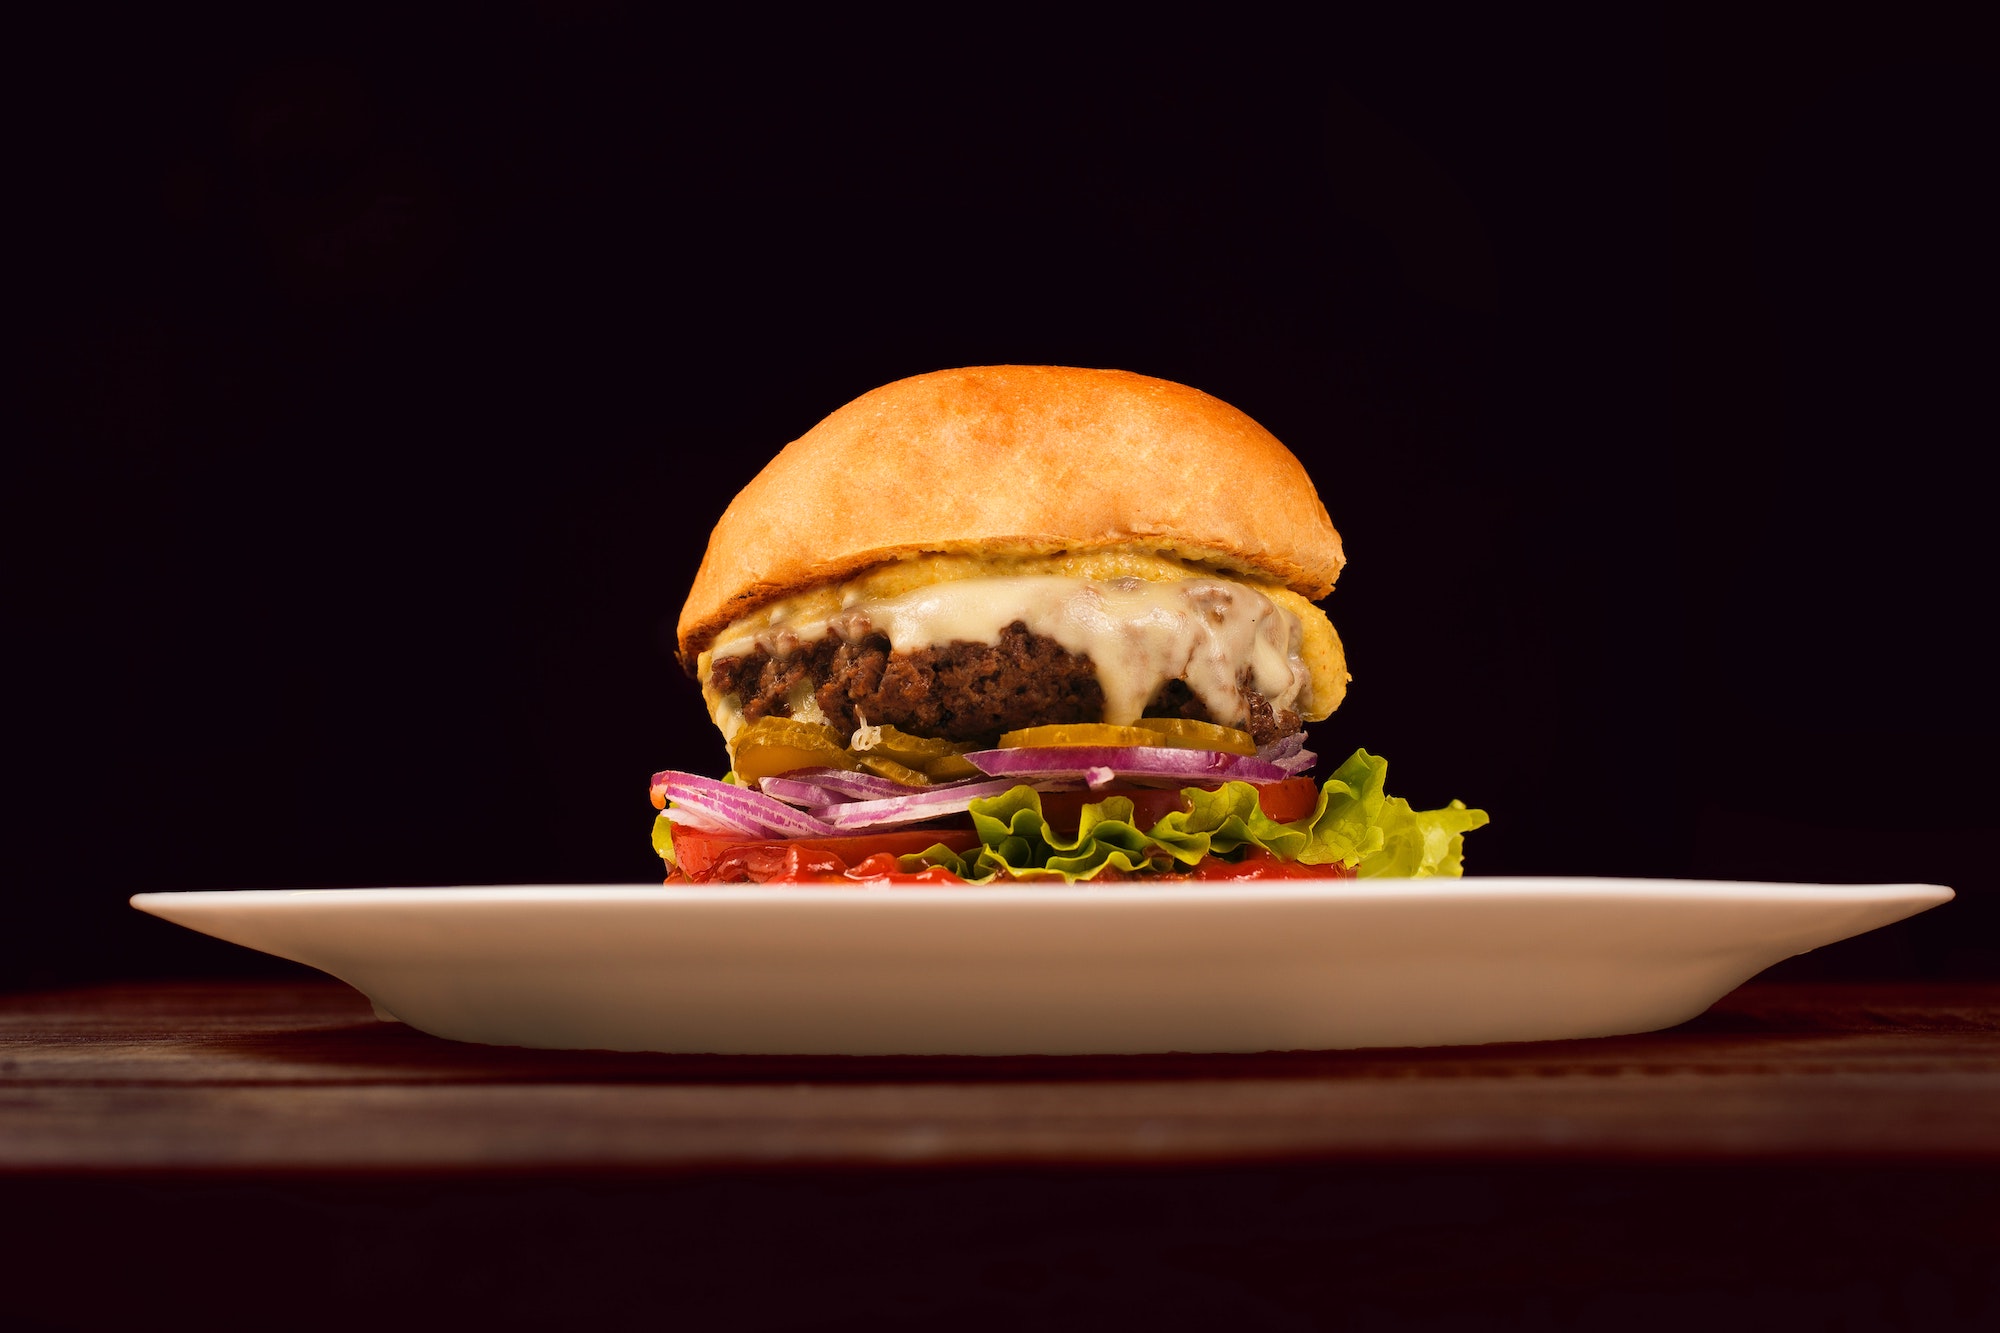 This burger has gone meat-free without jeopardizing its mouthwatering appeal.